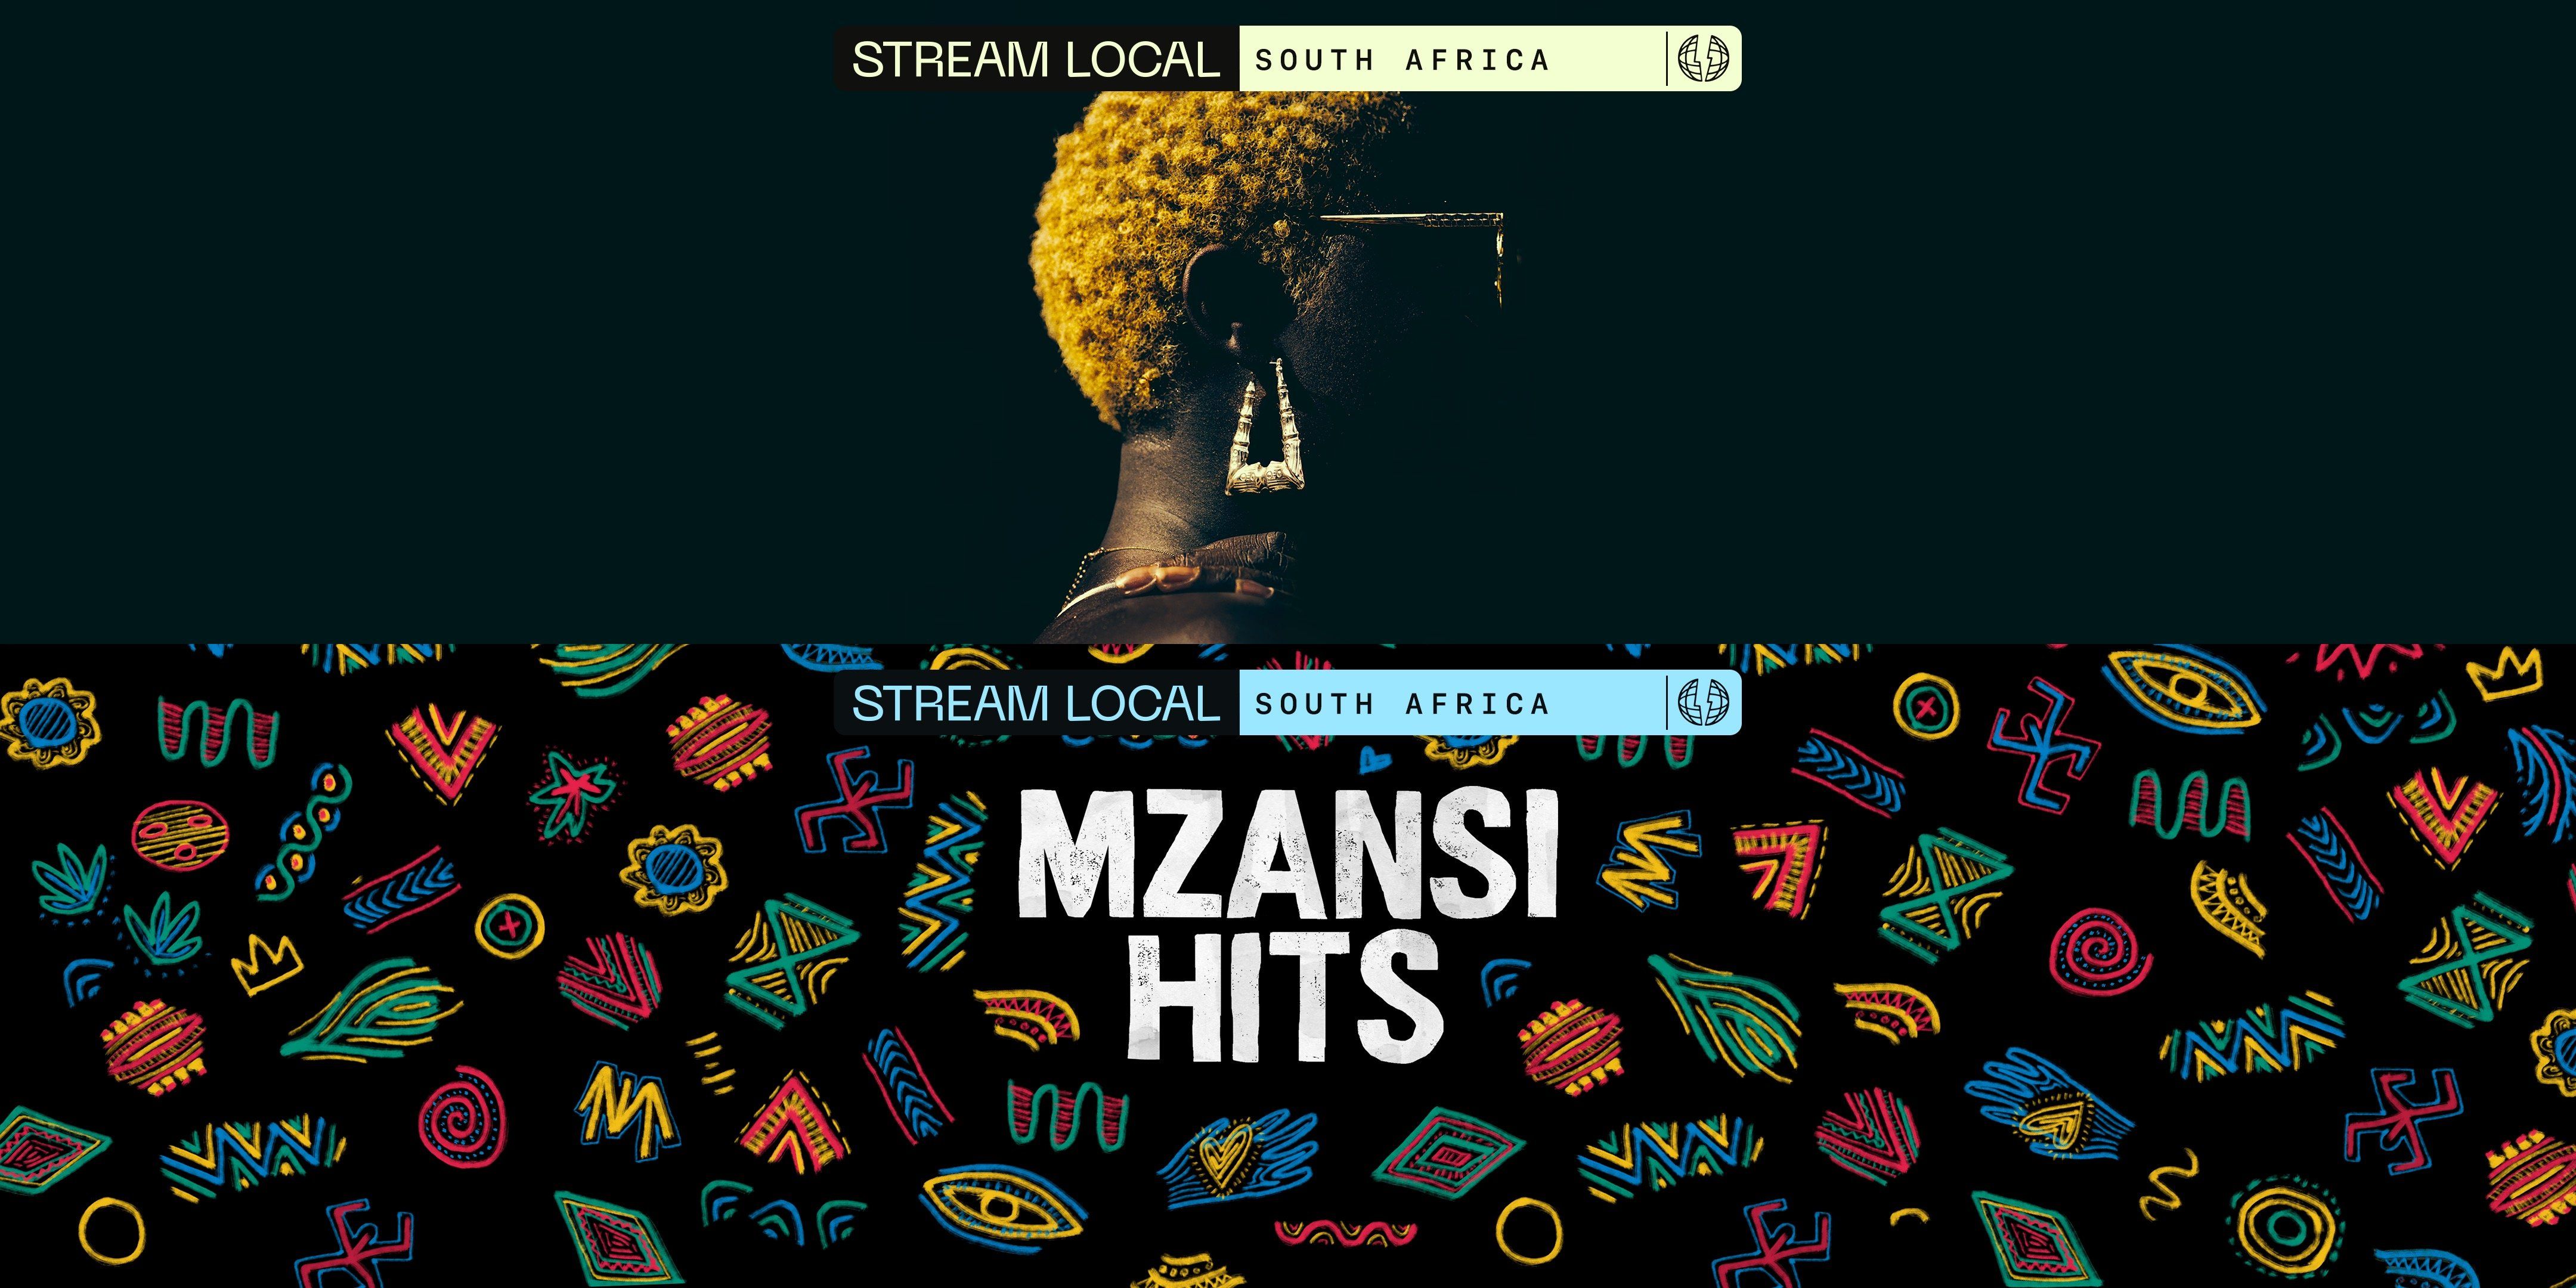 Apple Music will be streaming local to support South African artists. 